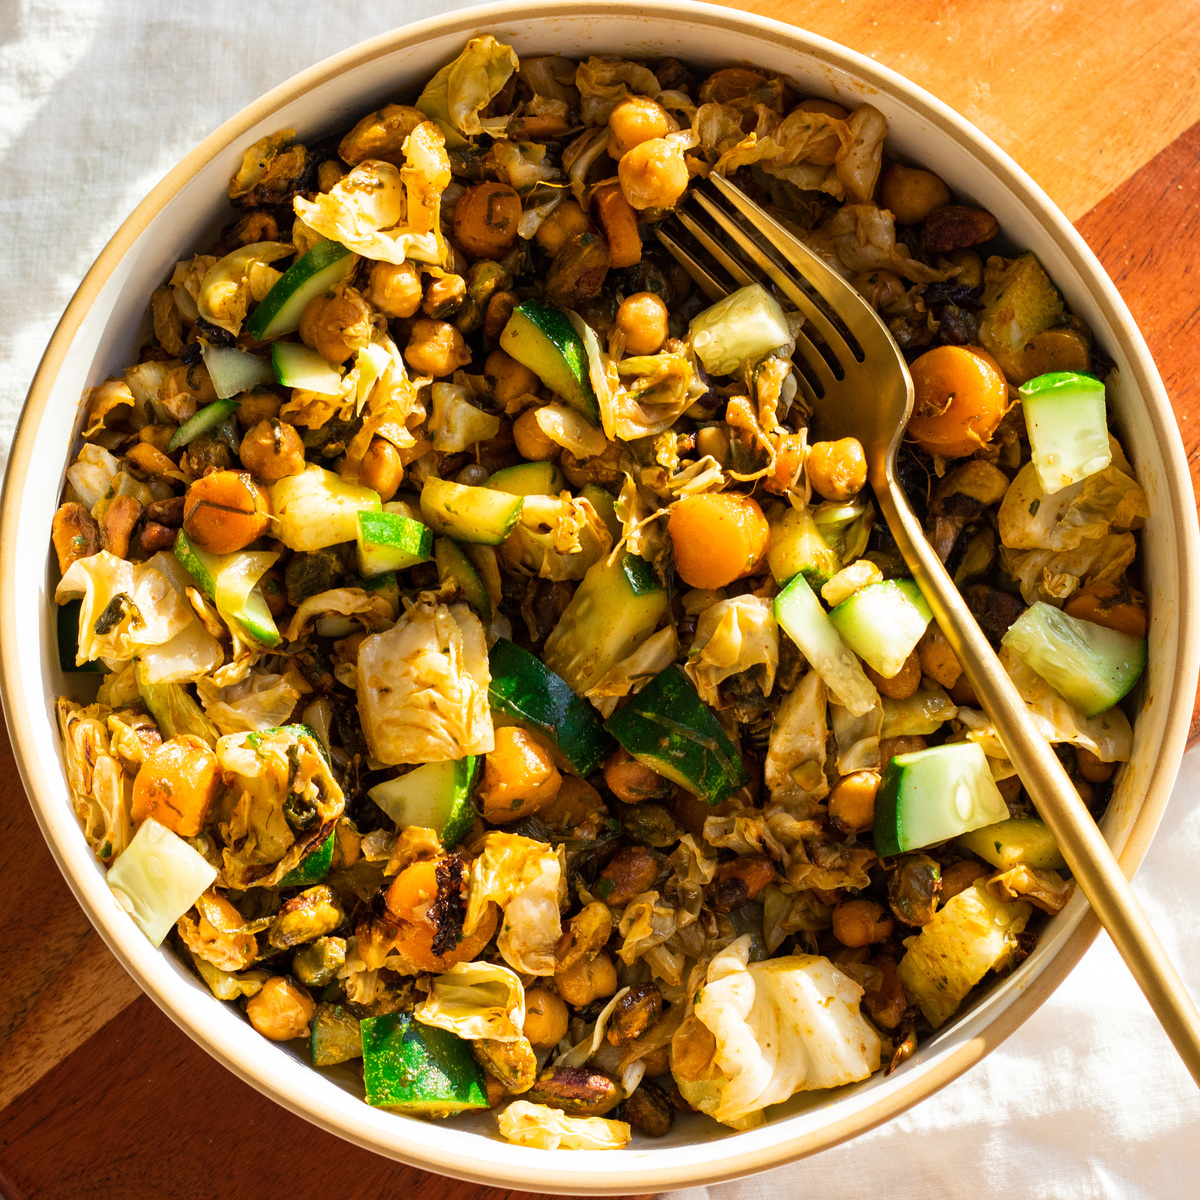 baked warm cabbage, carrots and chickpea salad with basil scallion vinaigrette